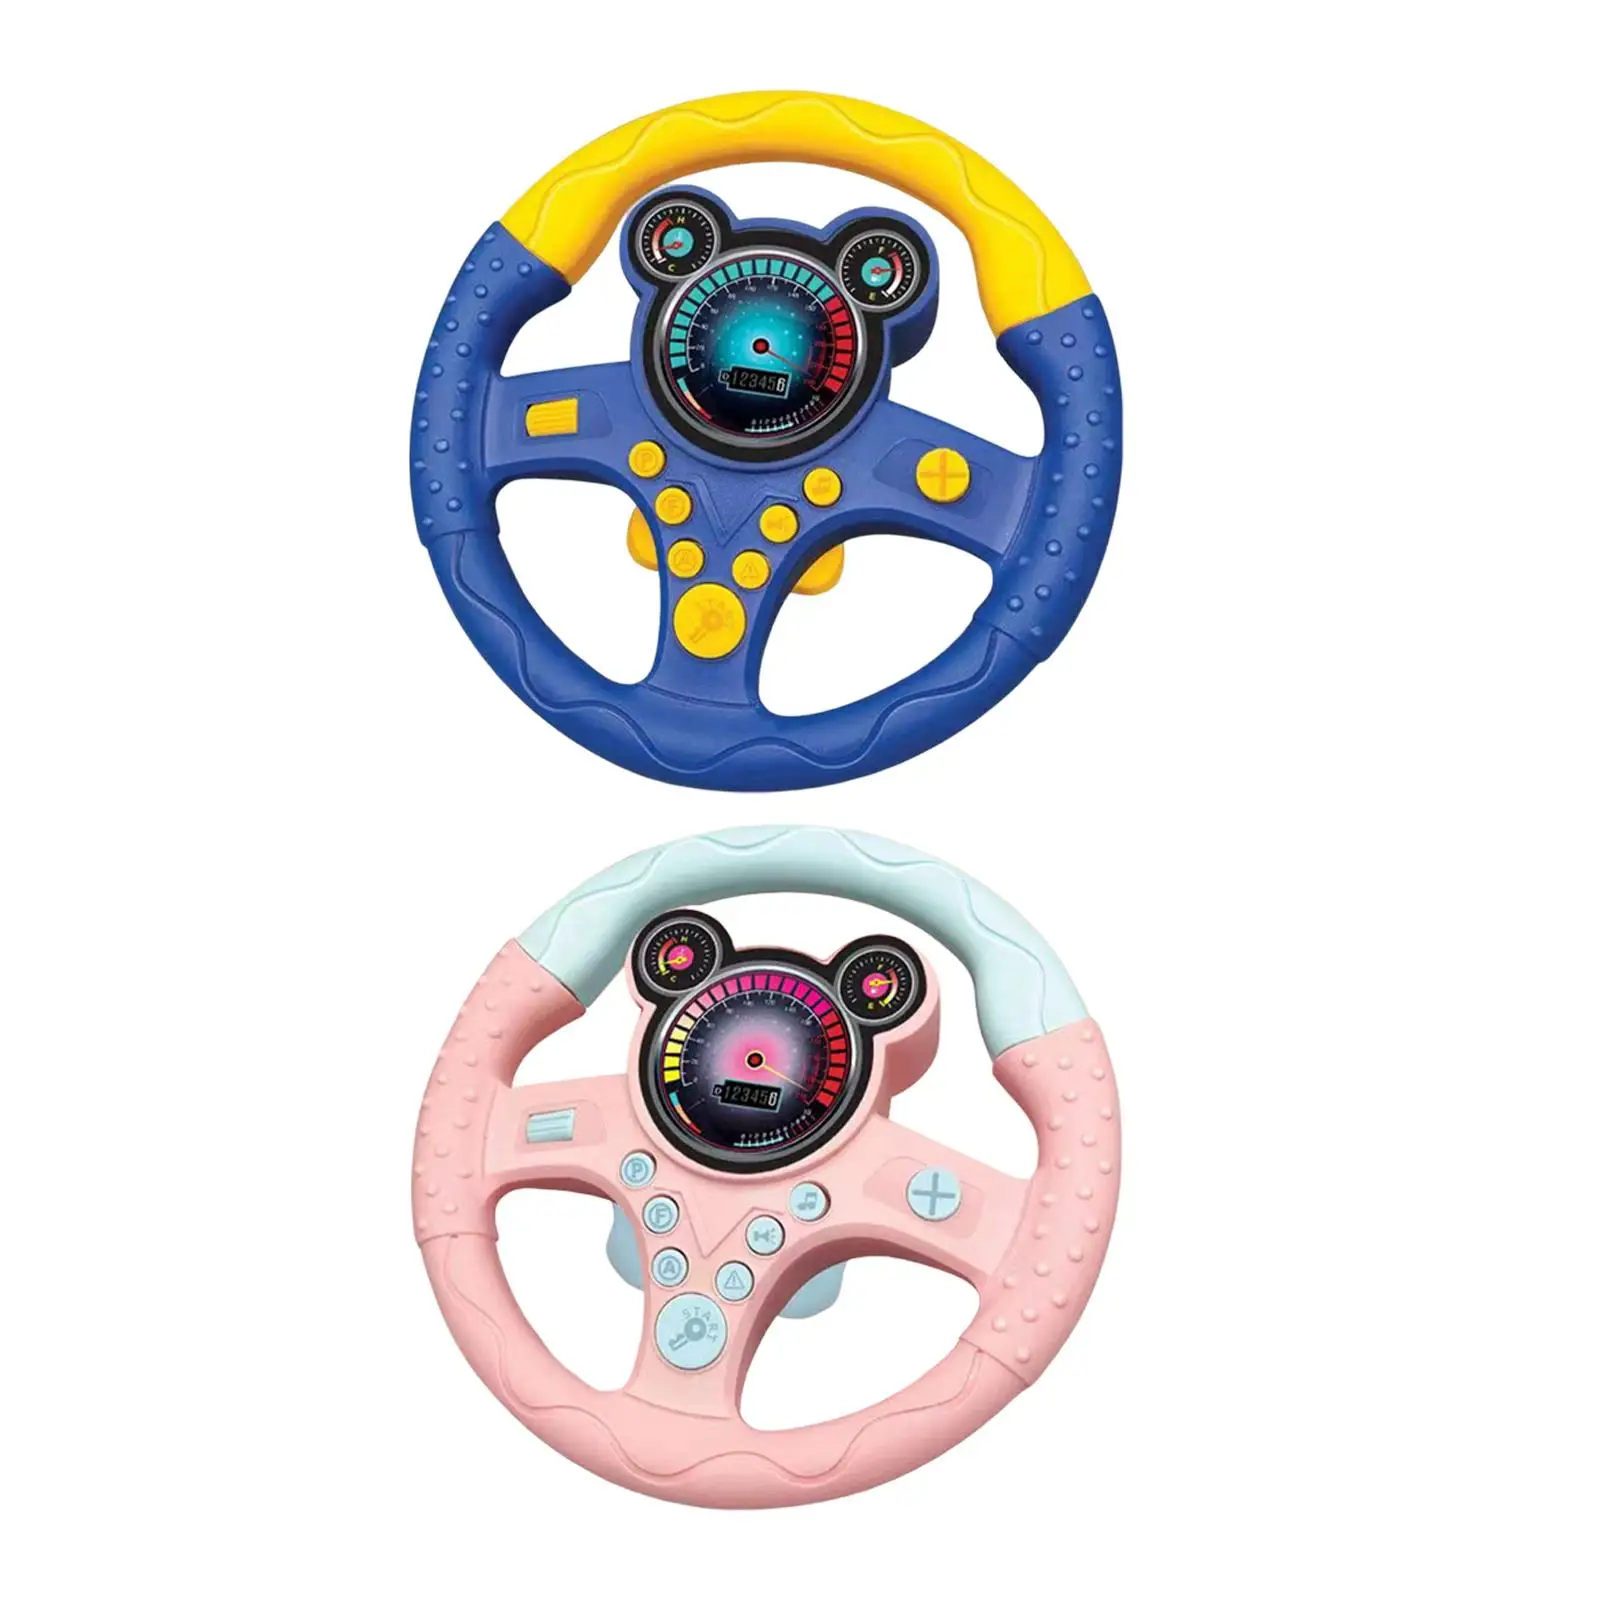 Simulation Car Driving Toy Driving Kids Electric Wheel Toy Busy Board DIY Accessory for Garden Treehouse Outdoor Holiday Gifts